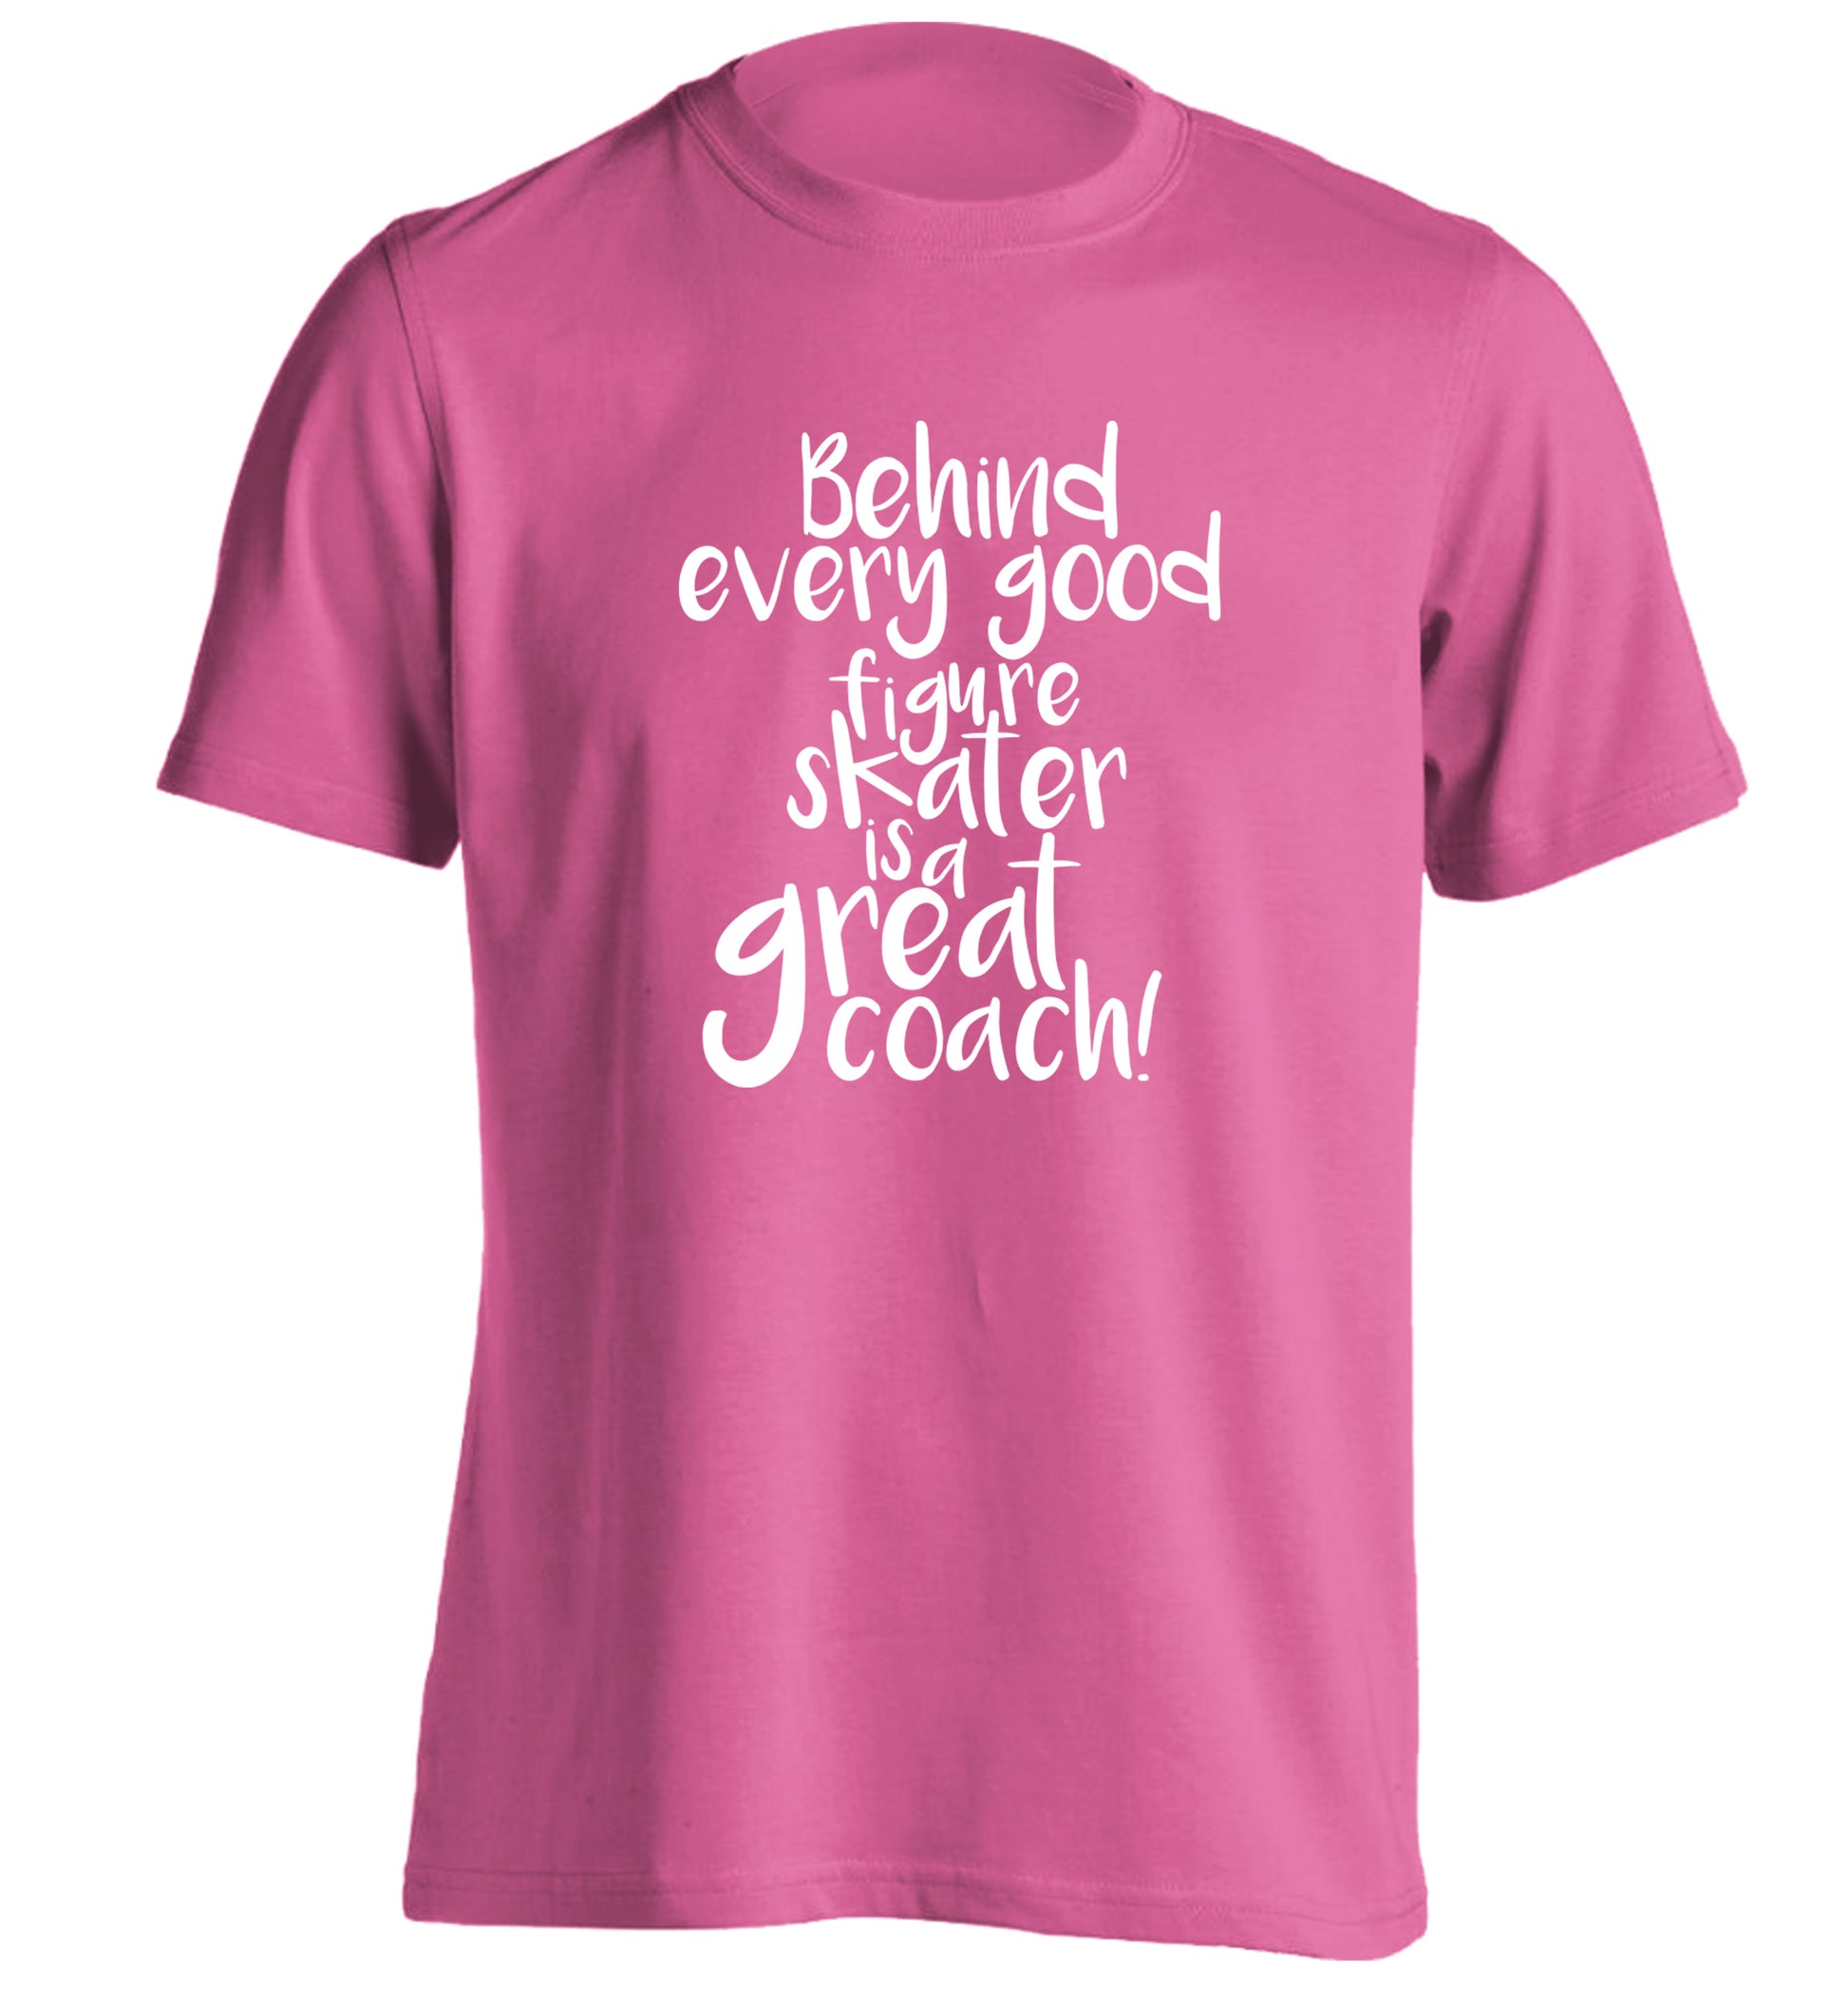 Behind every good figure skater is a great coach adults unisexpink Tshirt 2XL